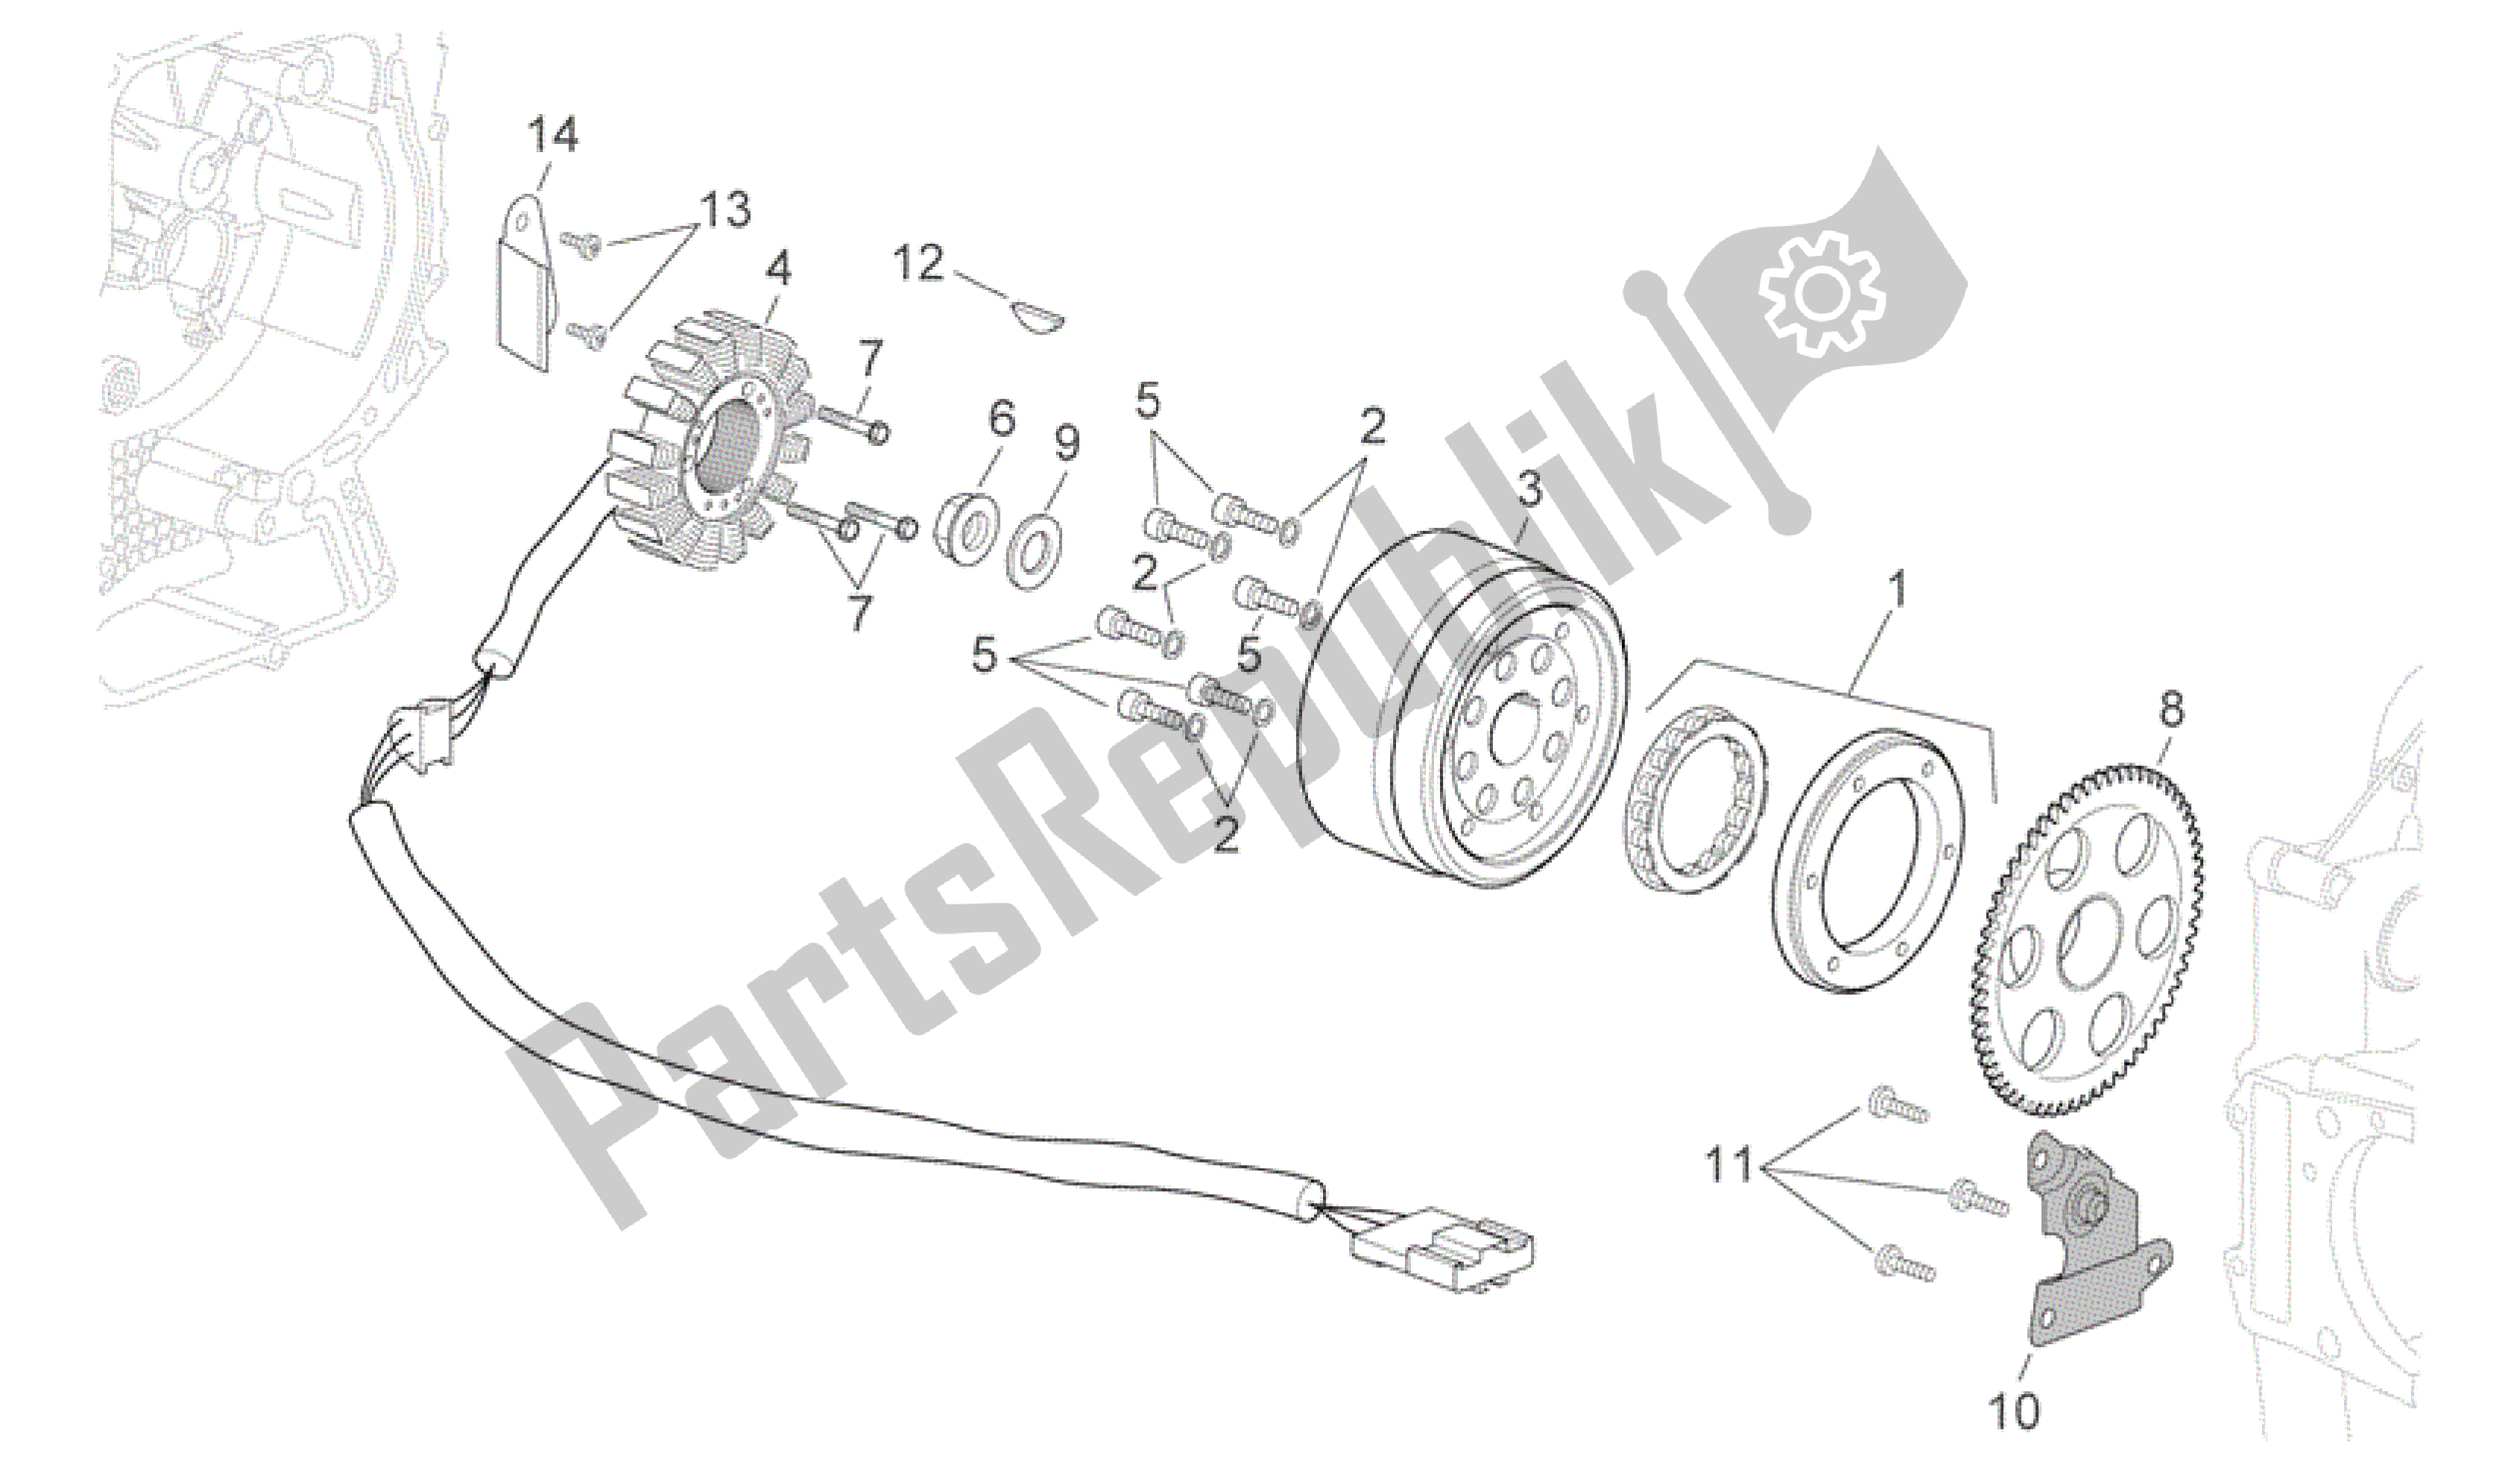 All parts for the Ignition Unit of the Aprilia Scarabeo 492 2006 - 2008